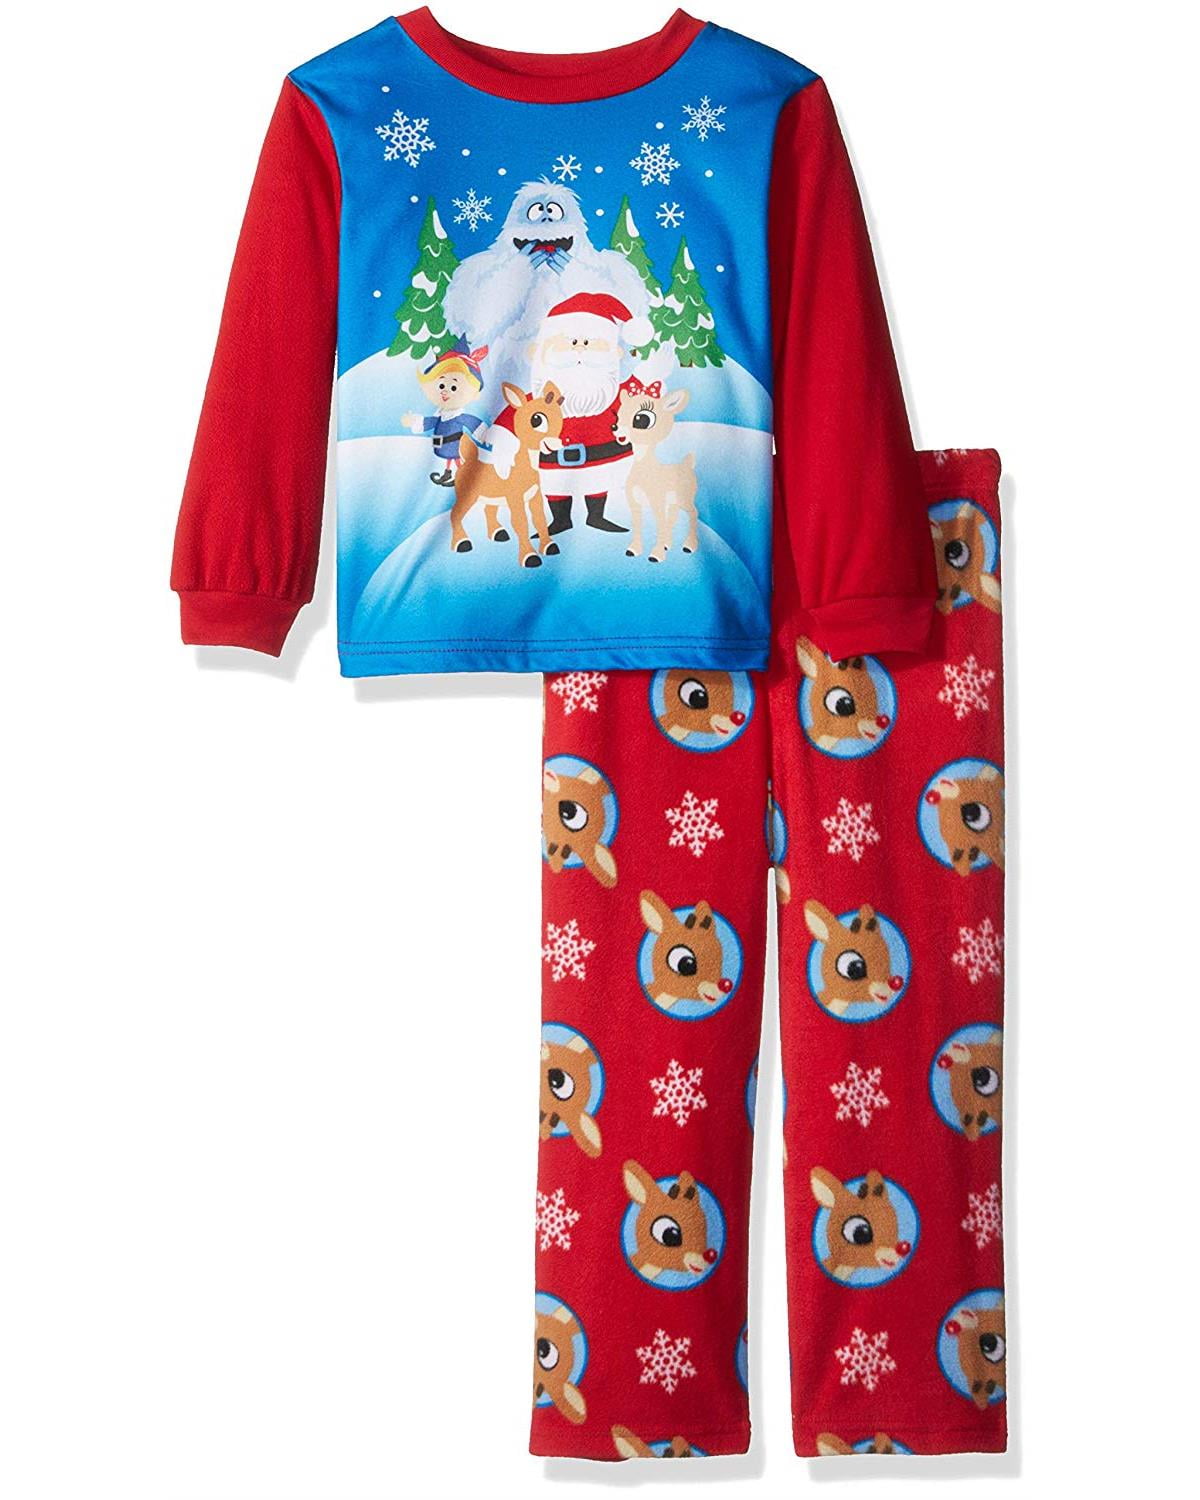 LiteWear Rudolph Boys Motion Activated Light Up Christmas Holiday Tee Shirt